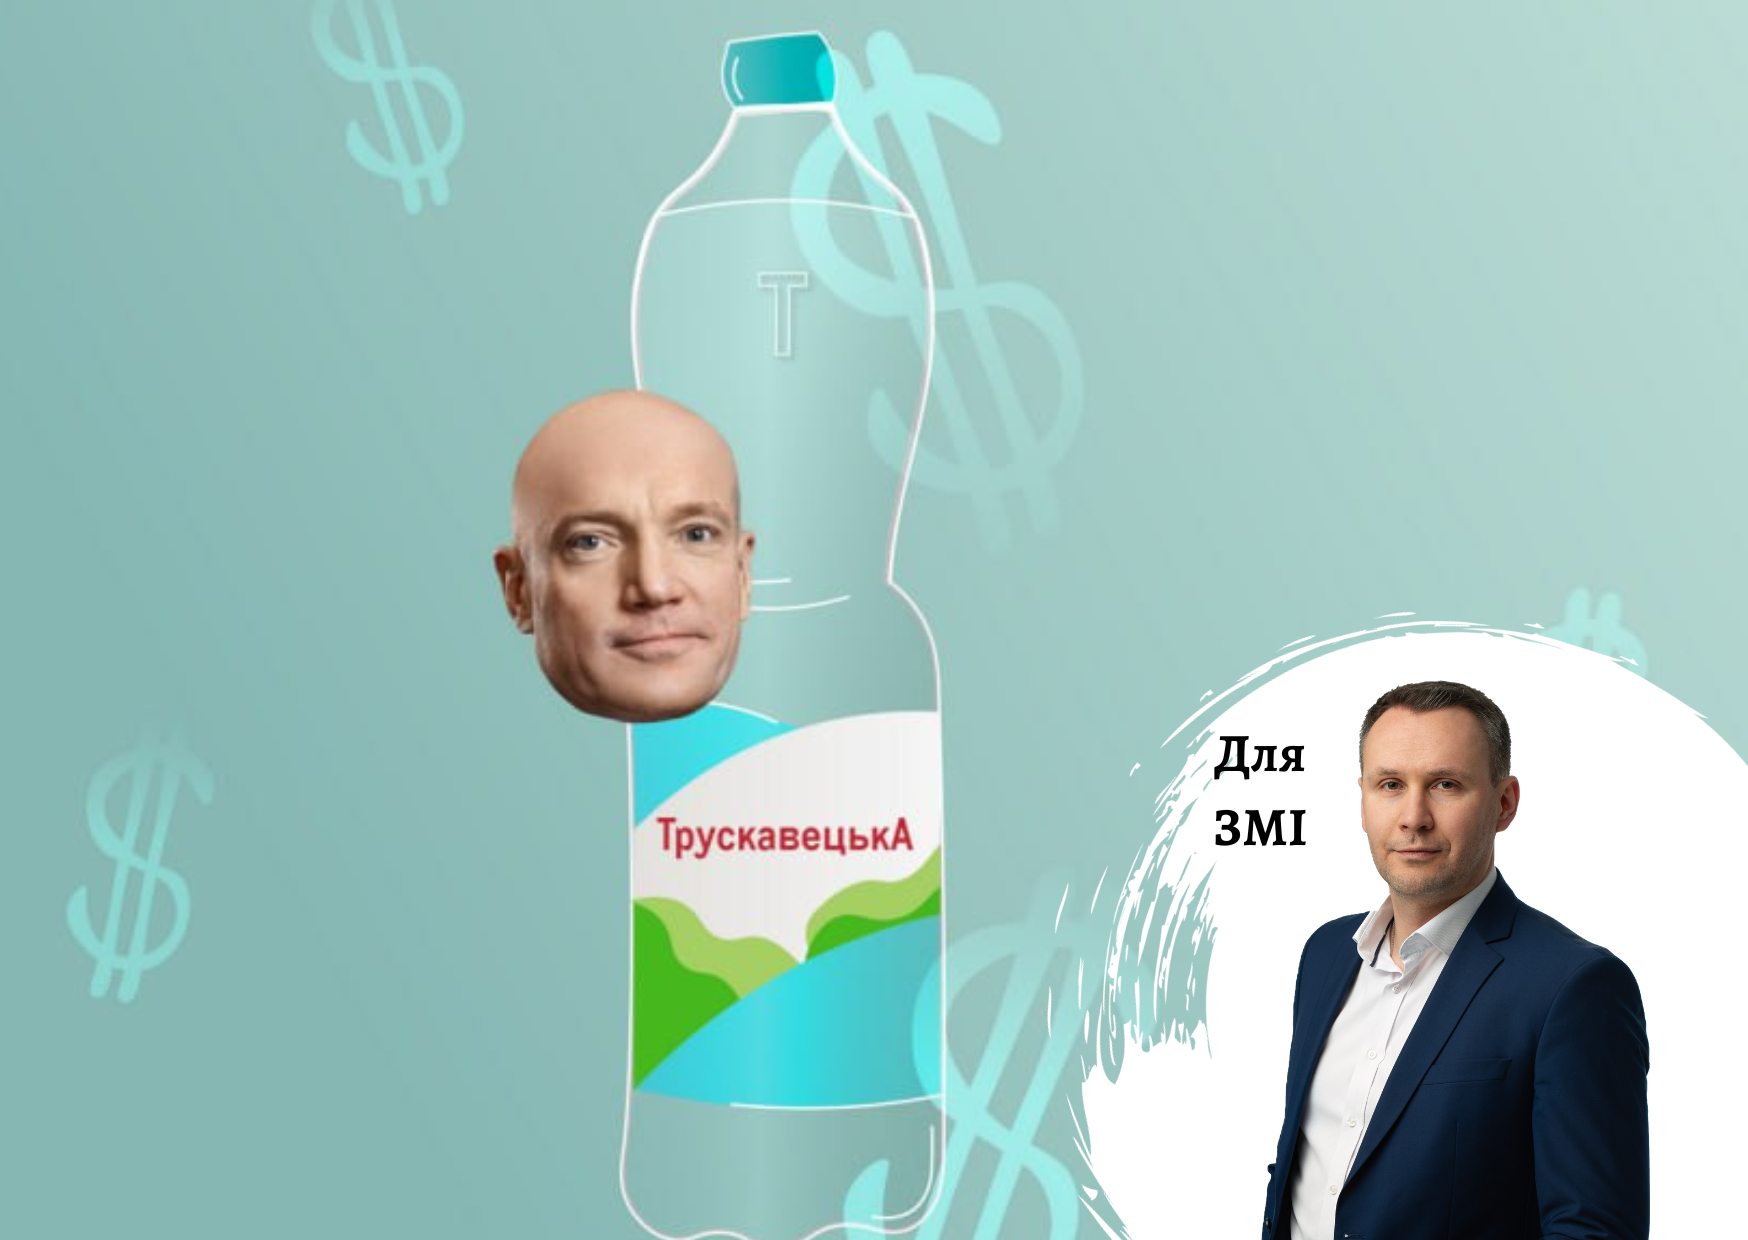 Tomas Fiala unites Truskavetska Water producers and gains control over the brand - comments on the water market by Pro-Consulting CEO Oleksander Sokolov. FORBES